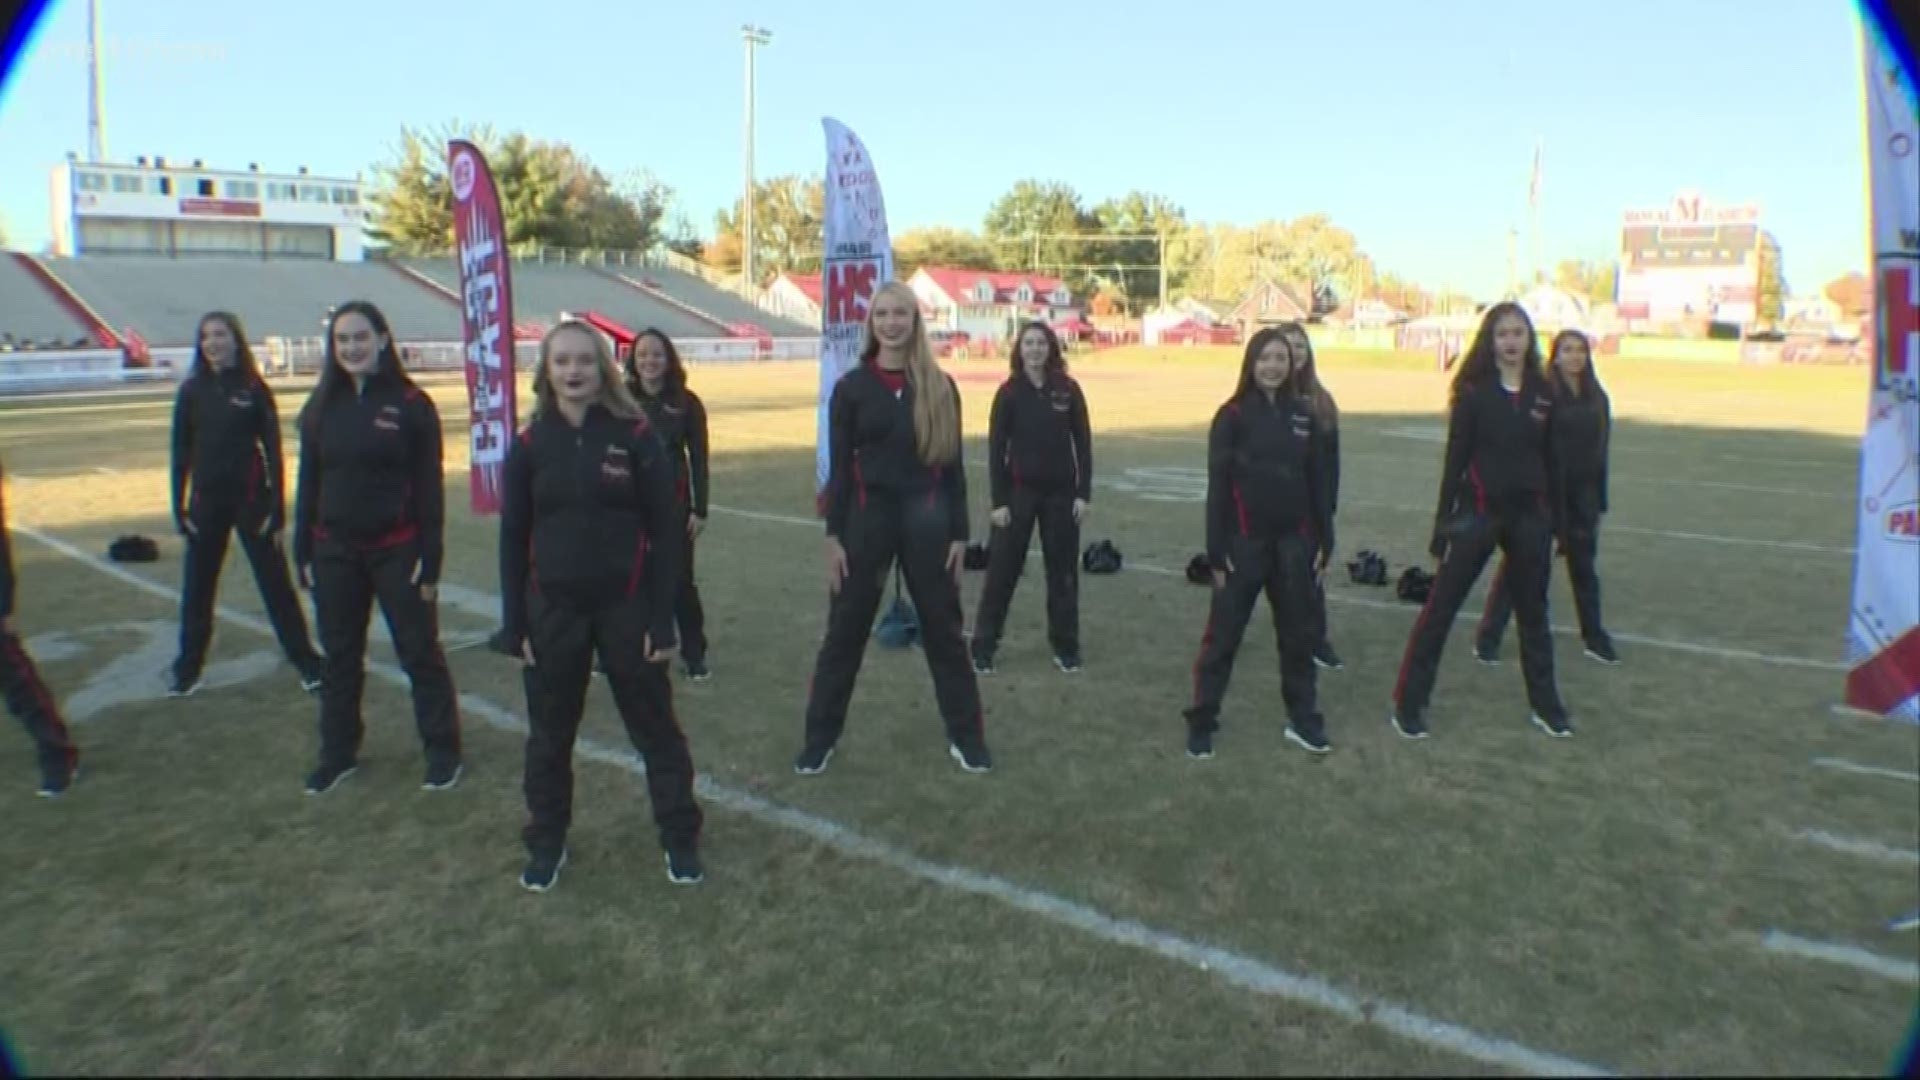 WHAS11's Sports Director Kent Spencer shines a spotlight on the duPont Manual Dazzlers ahead of the big game